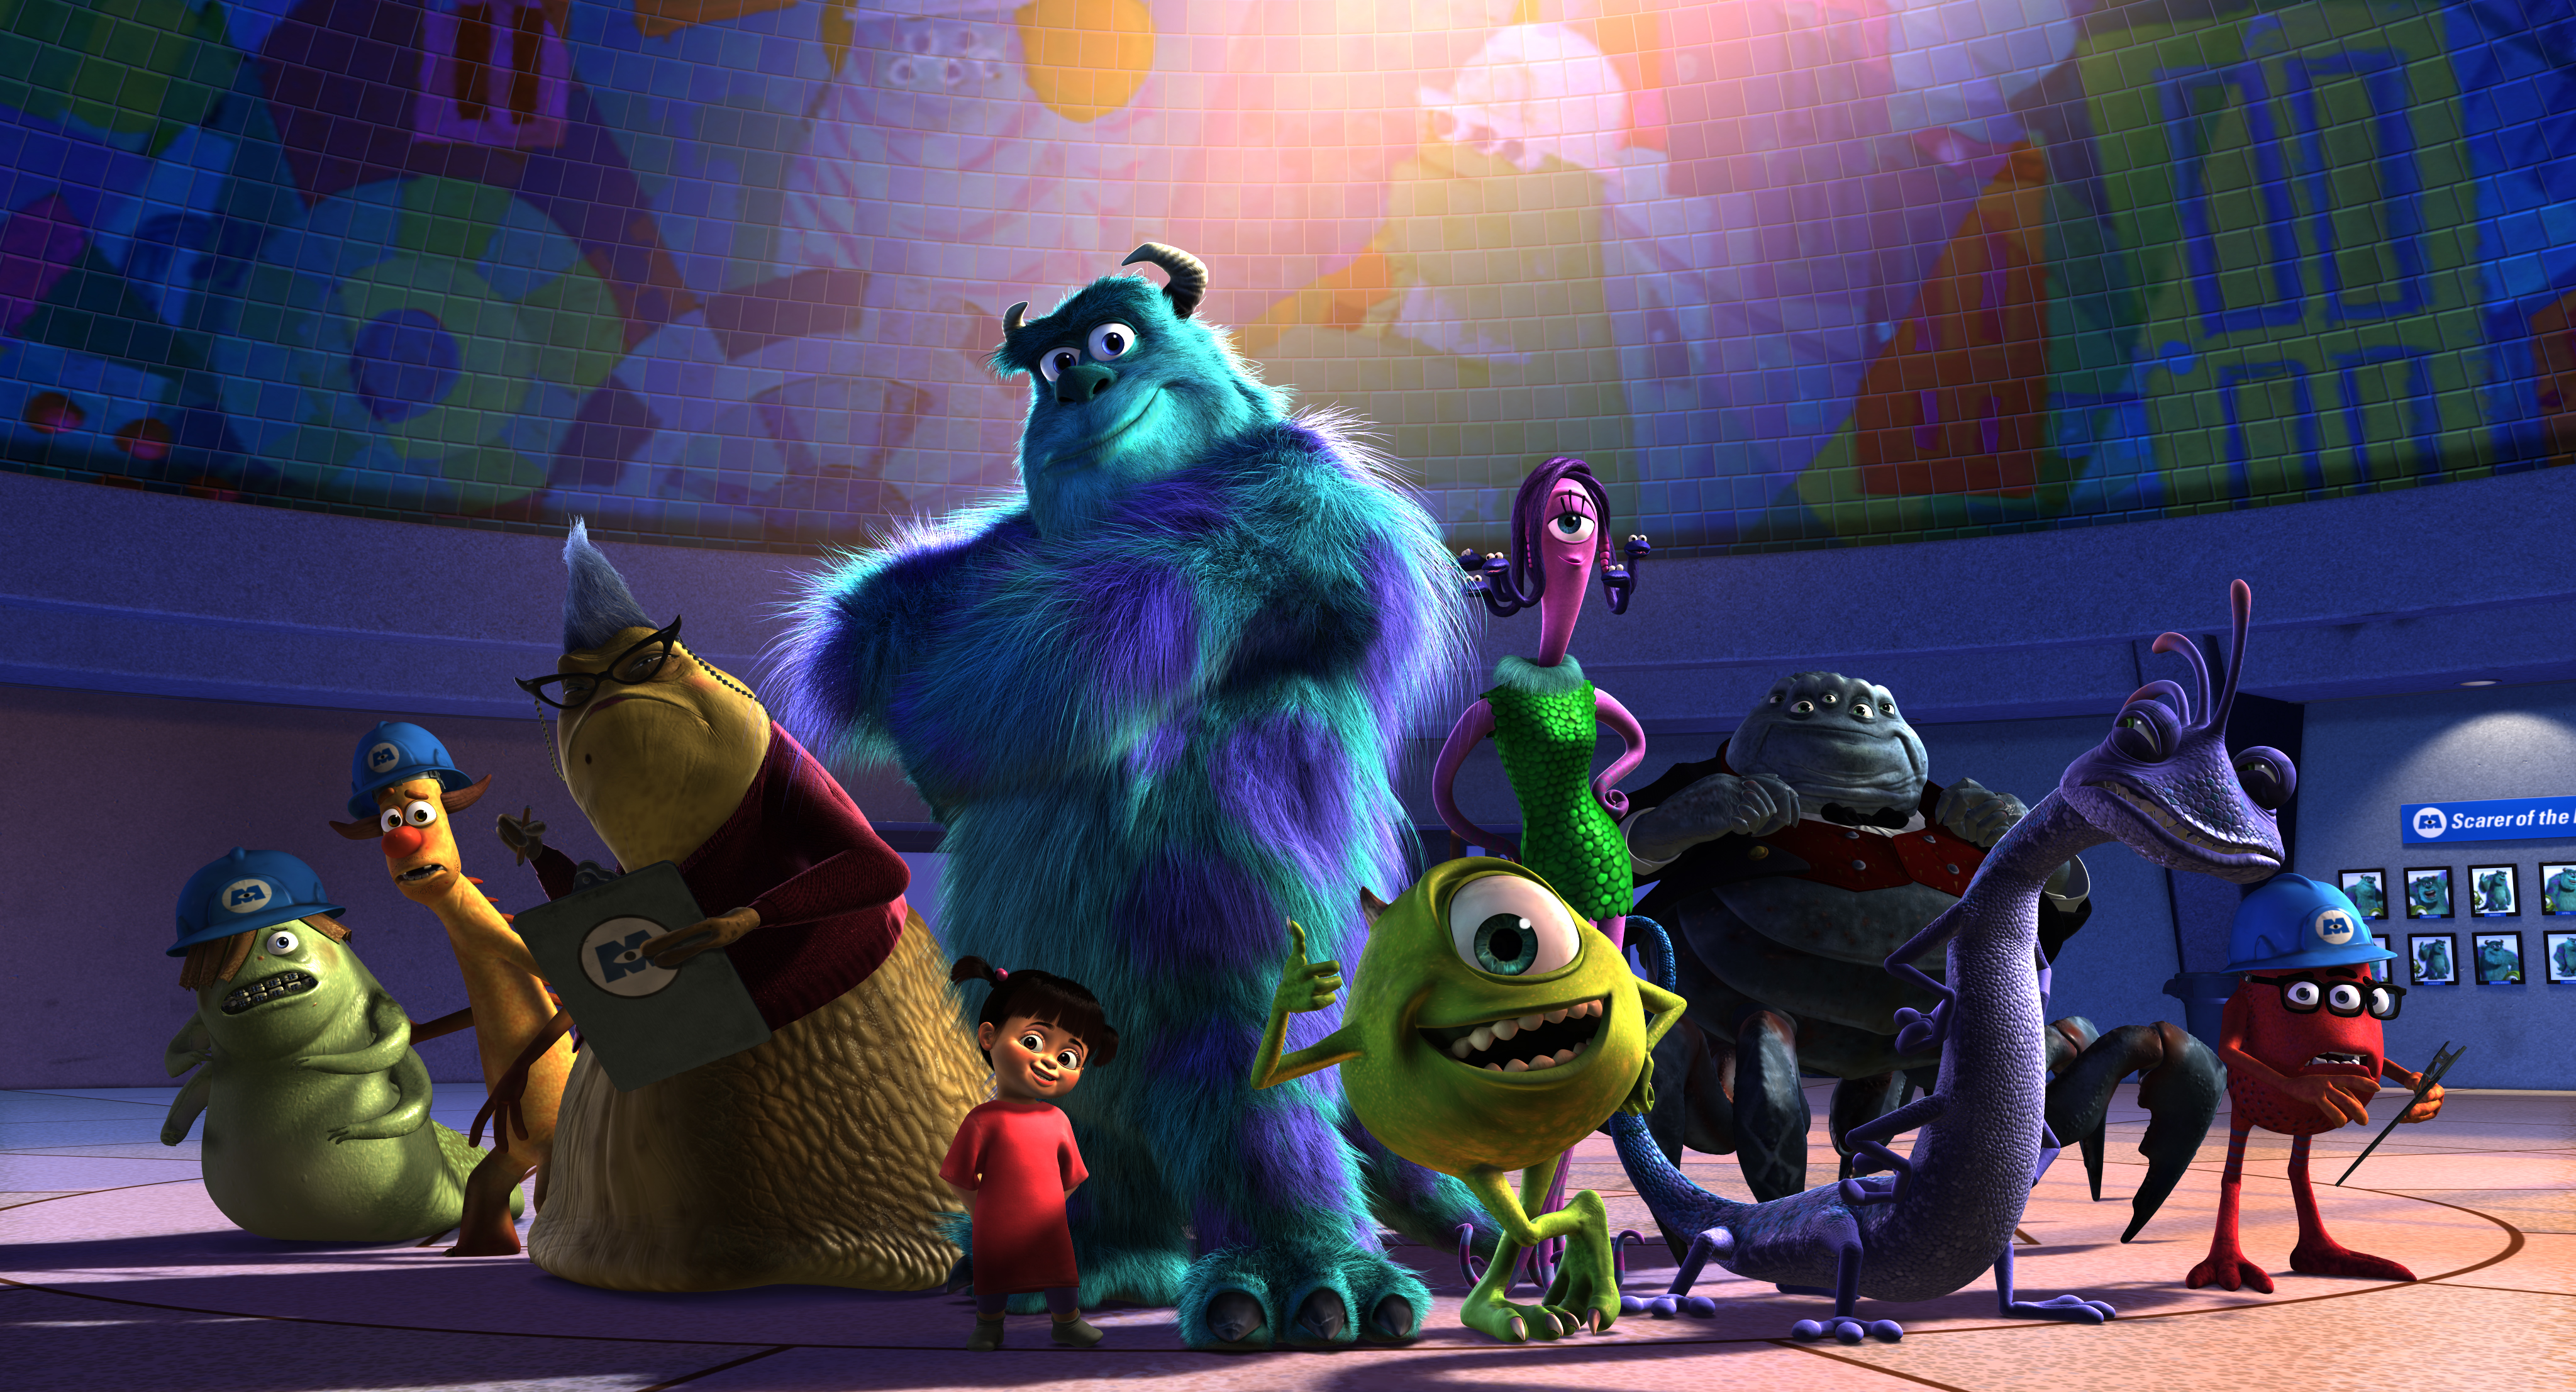 MU RANDALL We Scare SULLY Because We Care / Monsters Inc. 